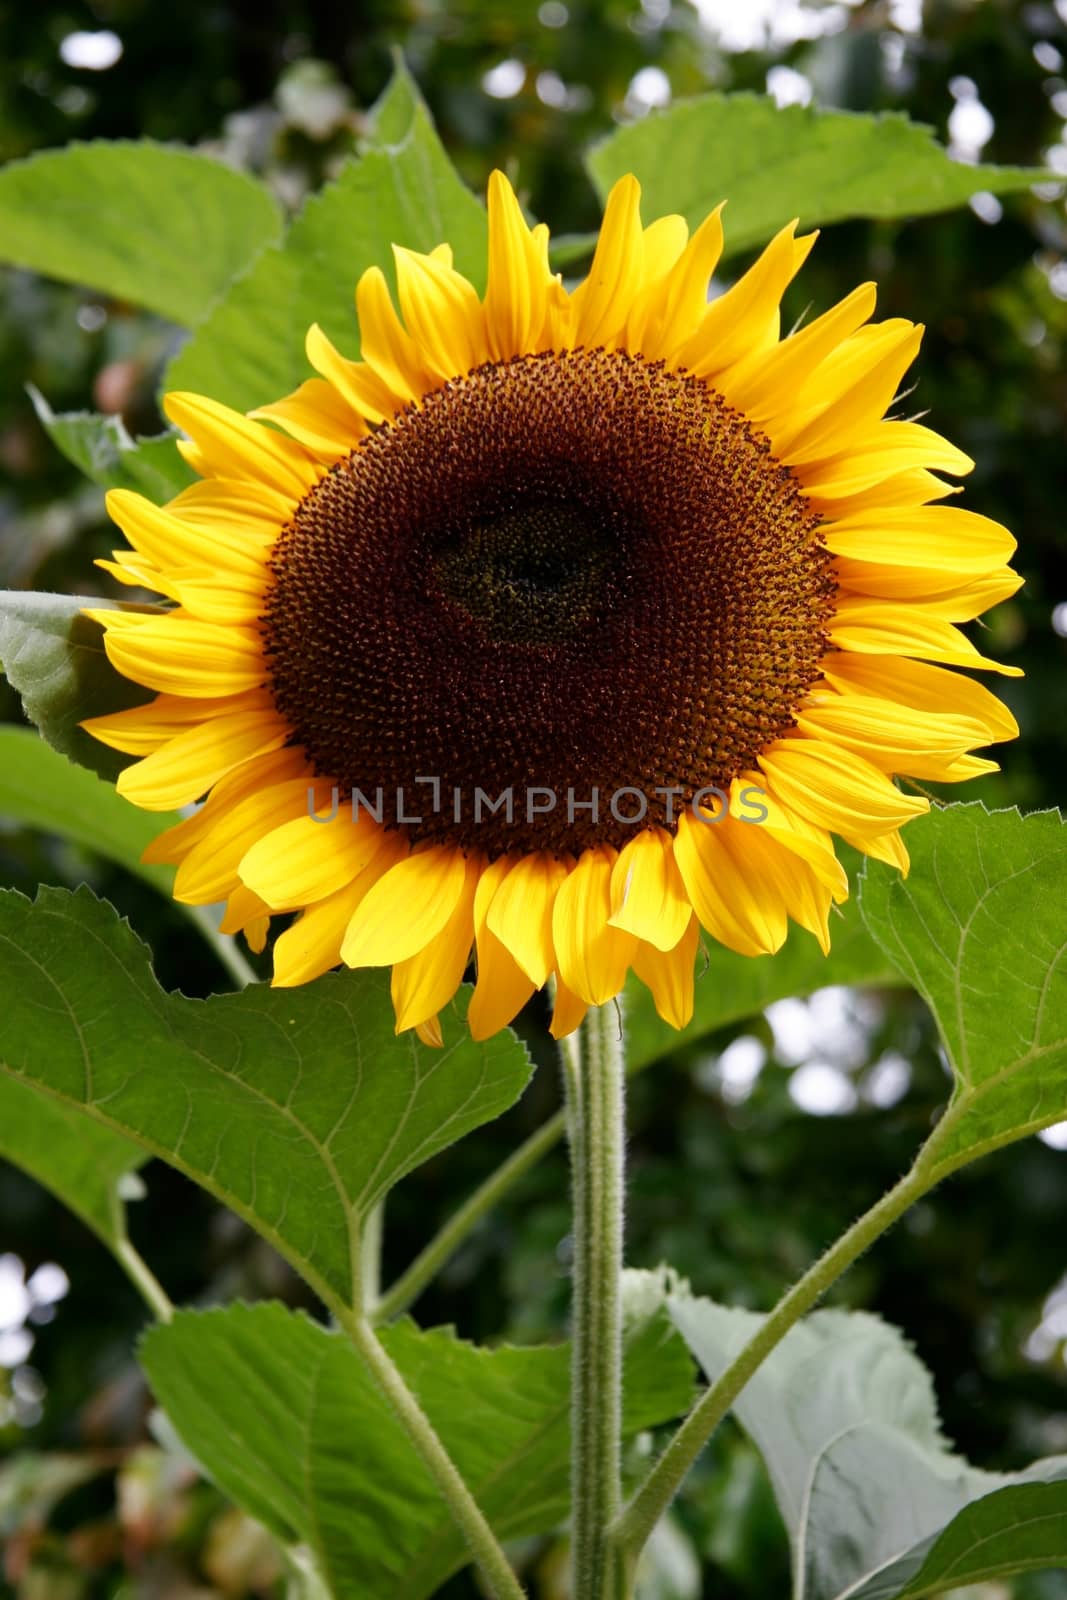 Magnificent Sunflower in full bloom